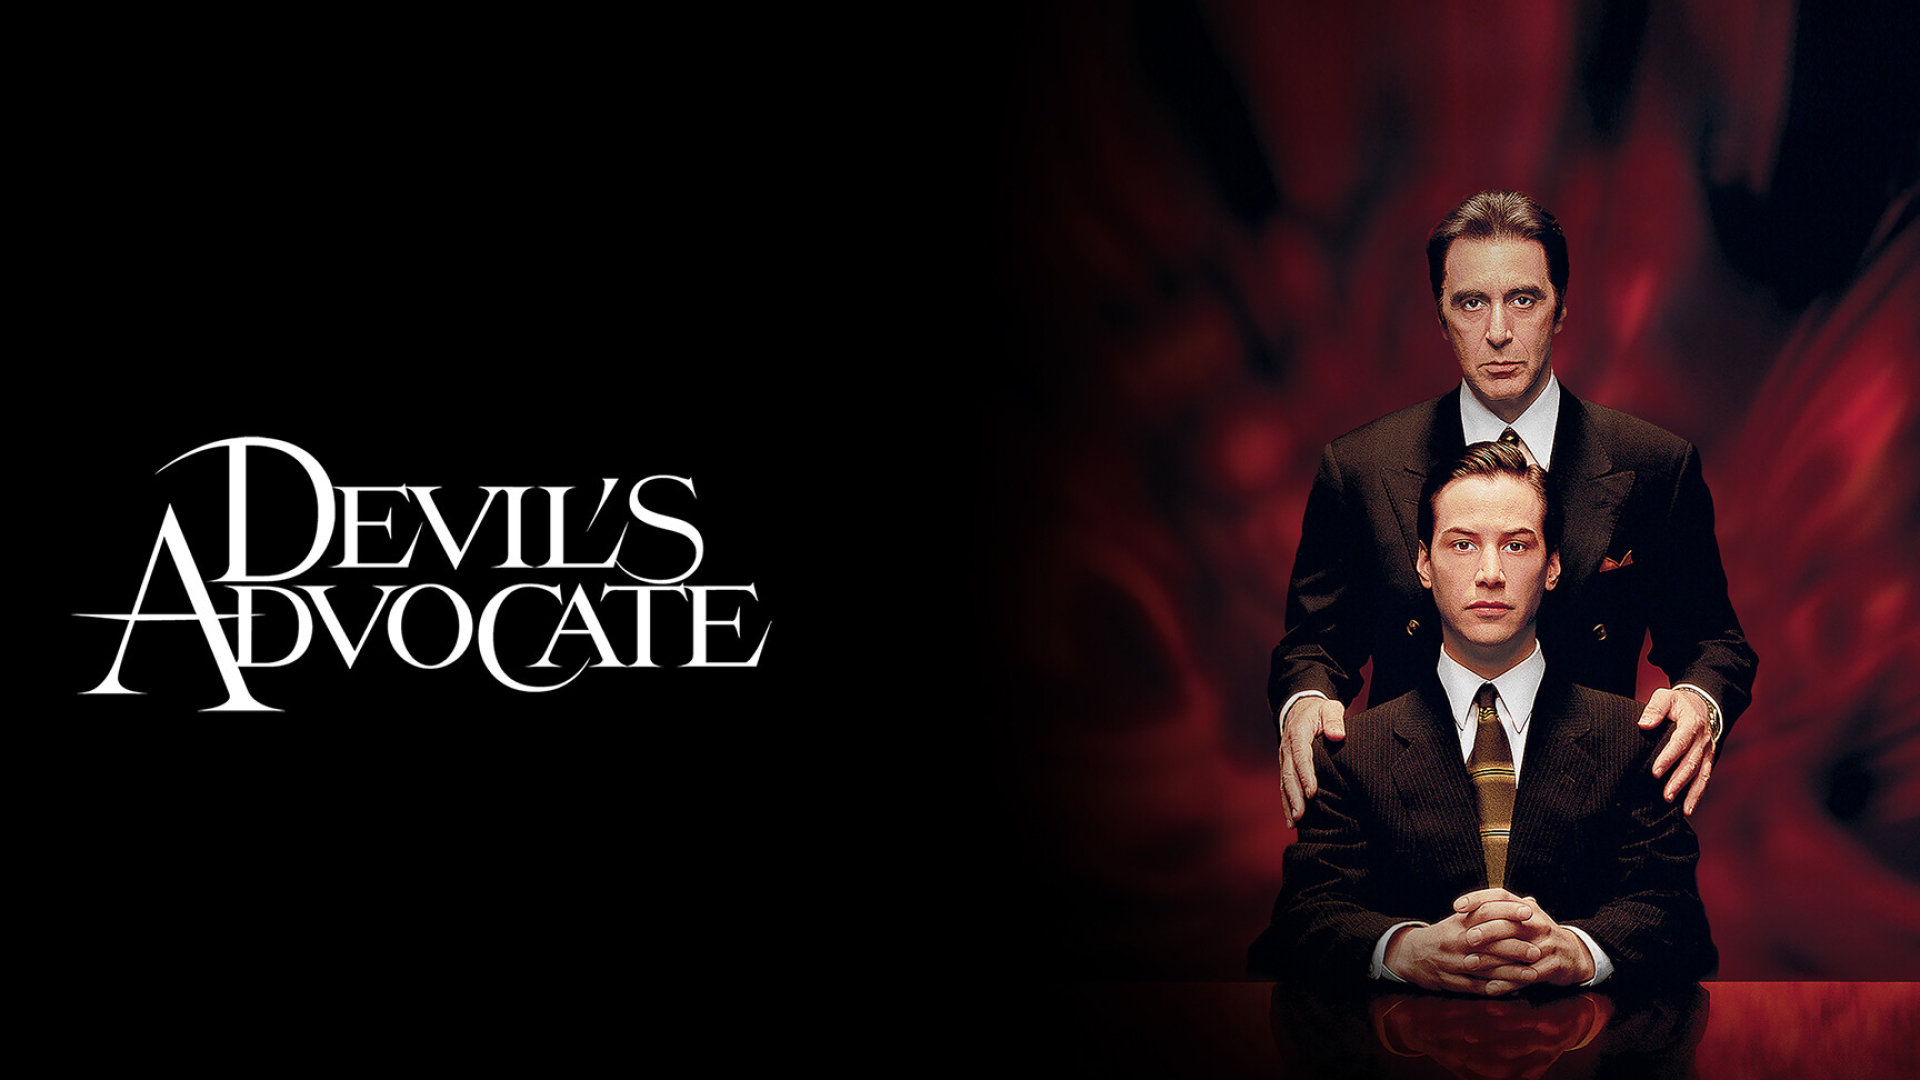 The Devil's Advocate (Movie): Taylor Hackford's seductive and stylistic thriller that's full of mystery and intrigue. 1920x1080 Full HD Background.